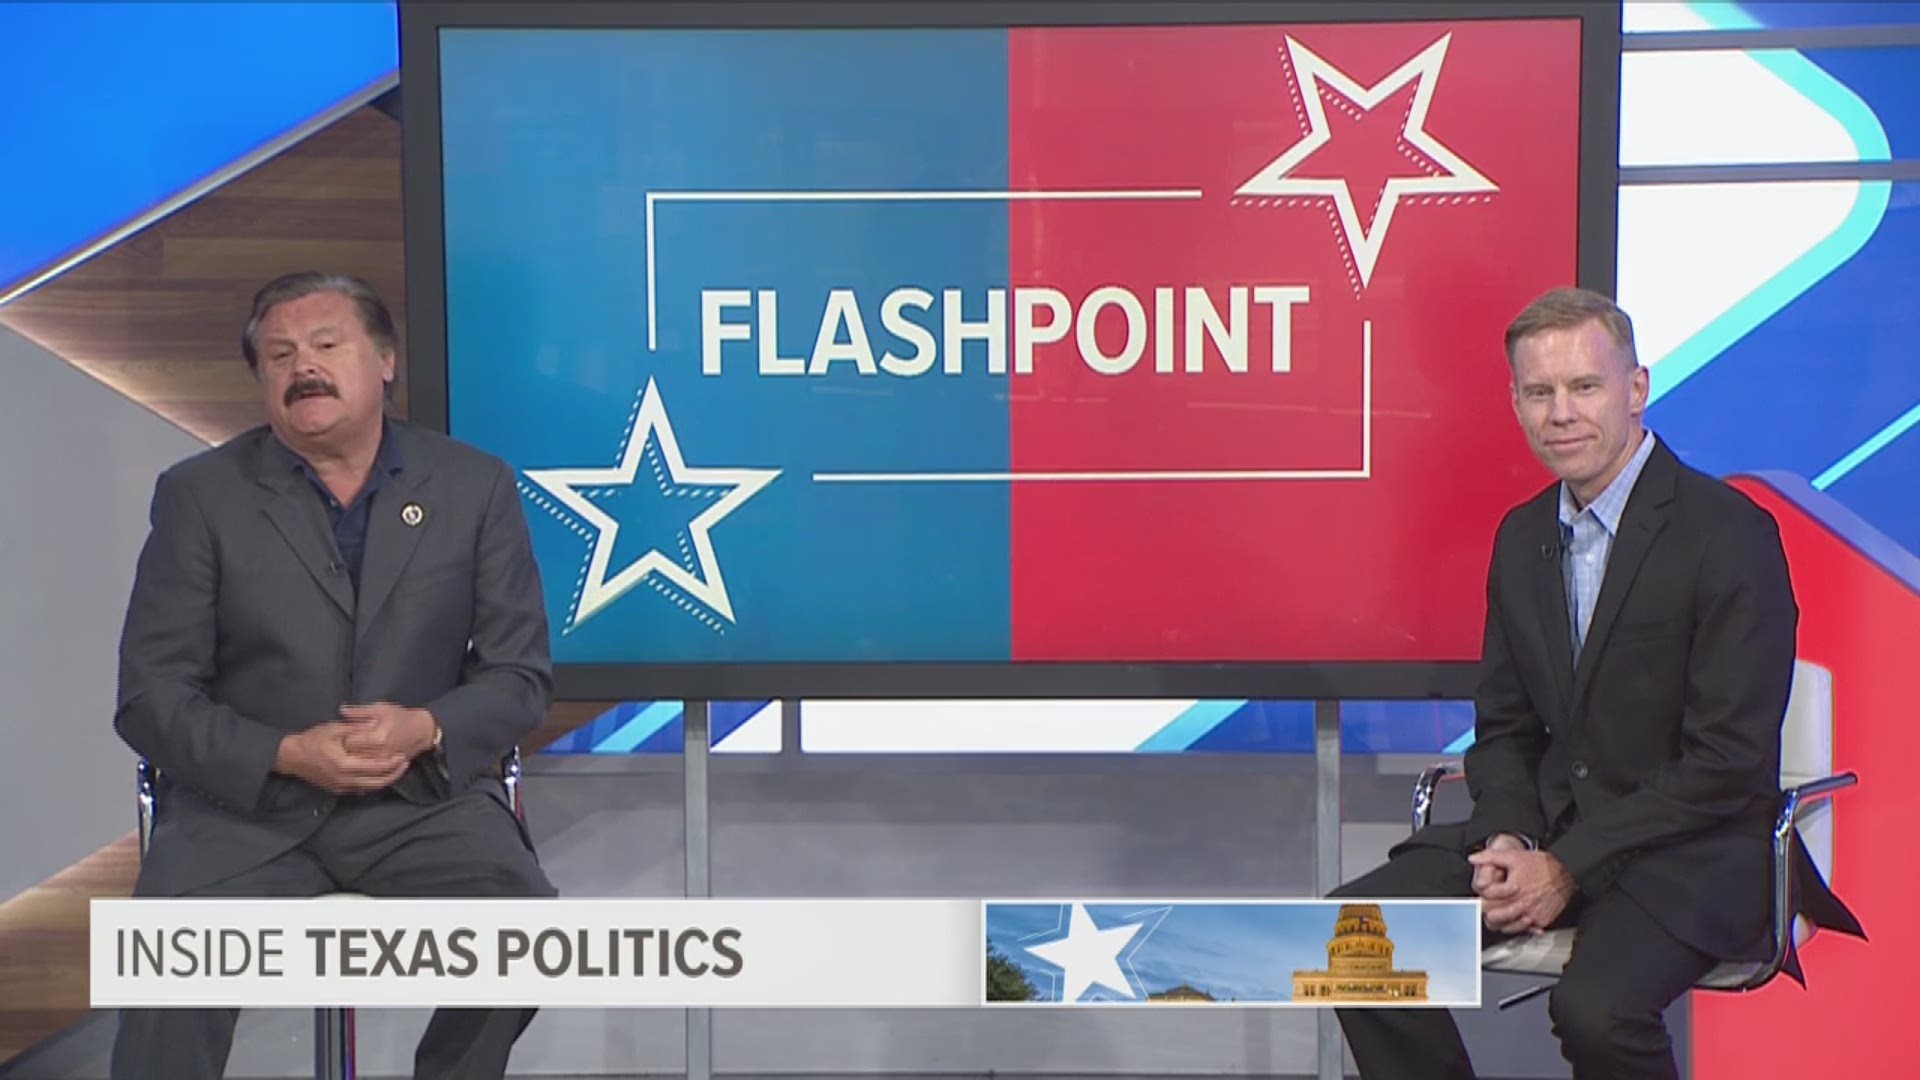 Healthcare is likely to become a driving issue in next year's presidential election. An idea from Bernie Sanders sparked this week’s Flashpoint. From the right, Wade Emmert, the former chairman of Dallas County's Republican Party. And from the left, LULAC's national president Domingo Garcia.